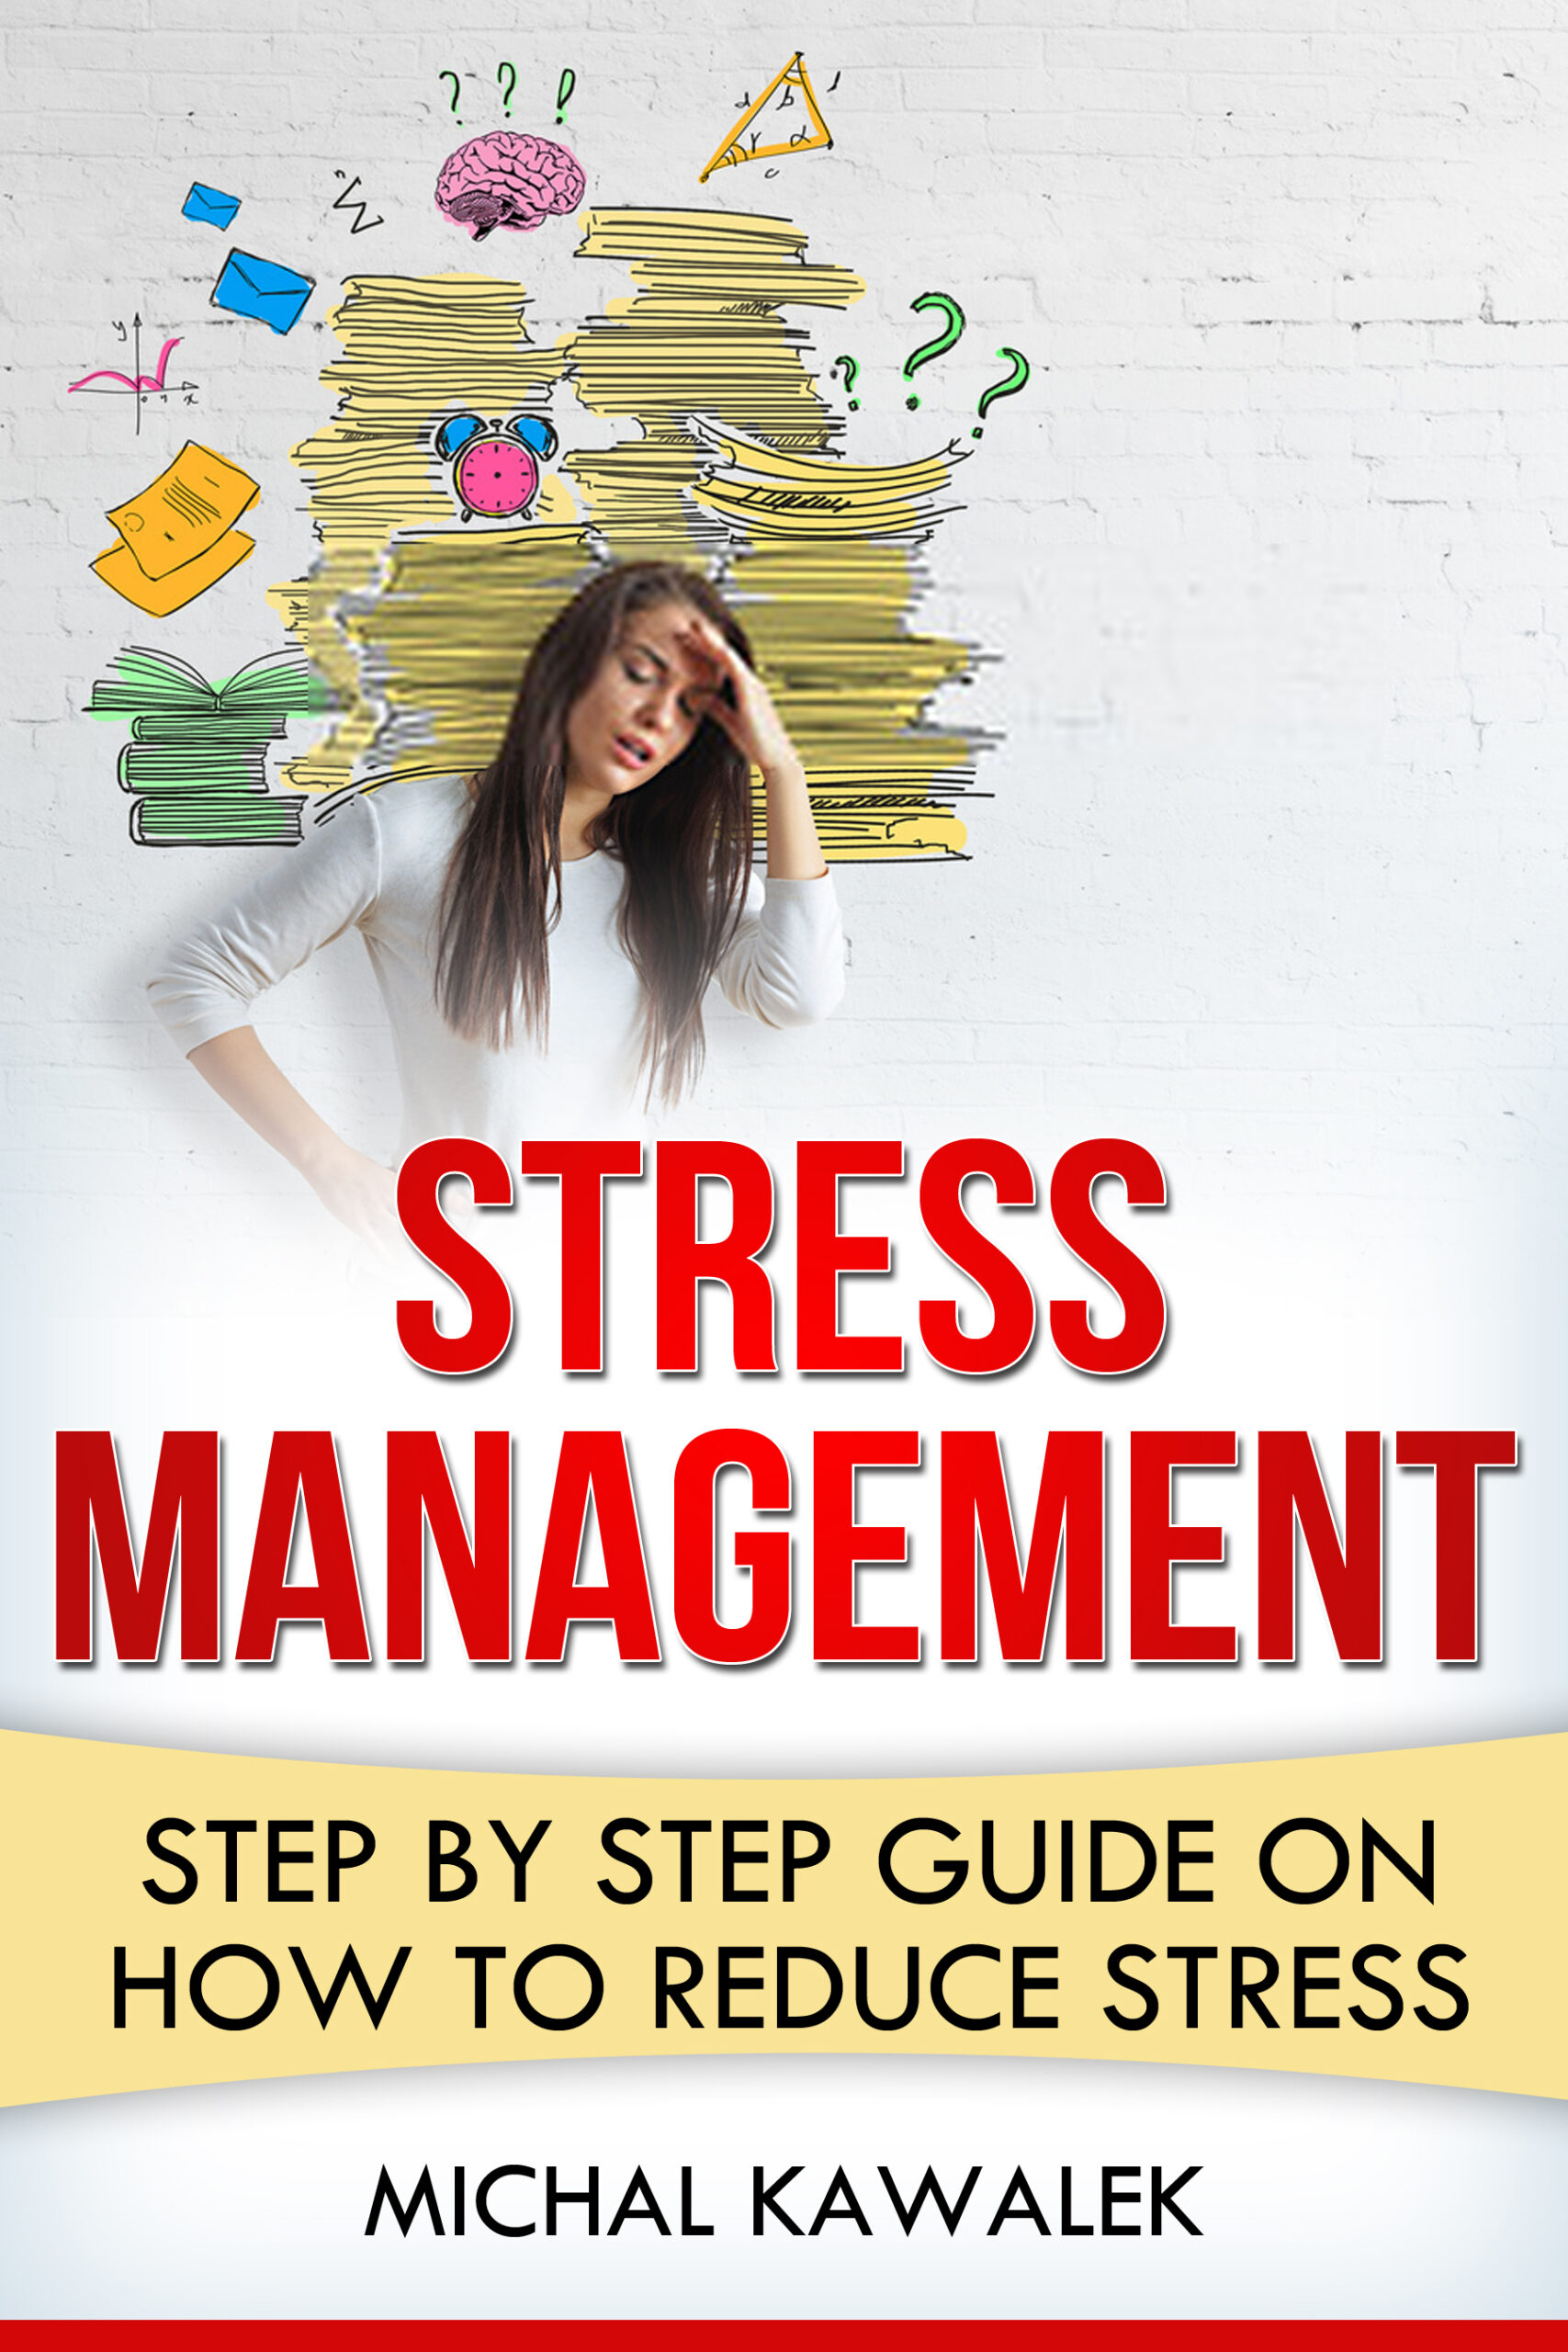 FREE: Stress Management Step by Step Guide on How to Reduce Stress: Best methods to prevent and relieve stress by Michal Kawalek